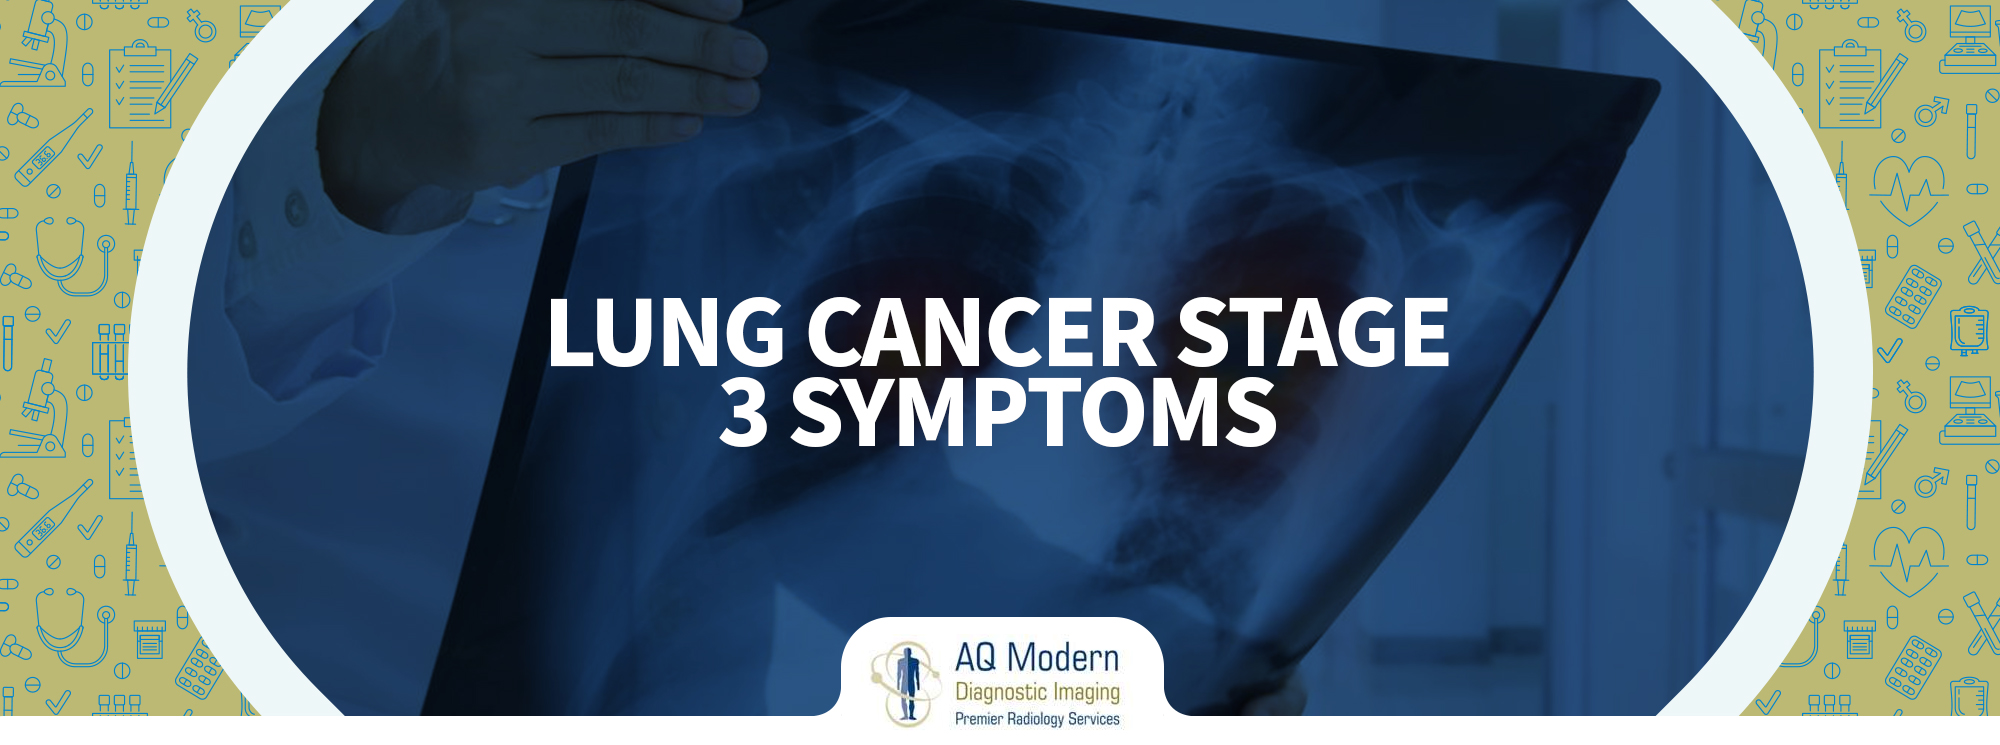 Lung Cancer Stage 3 Symptoms